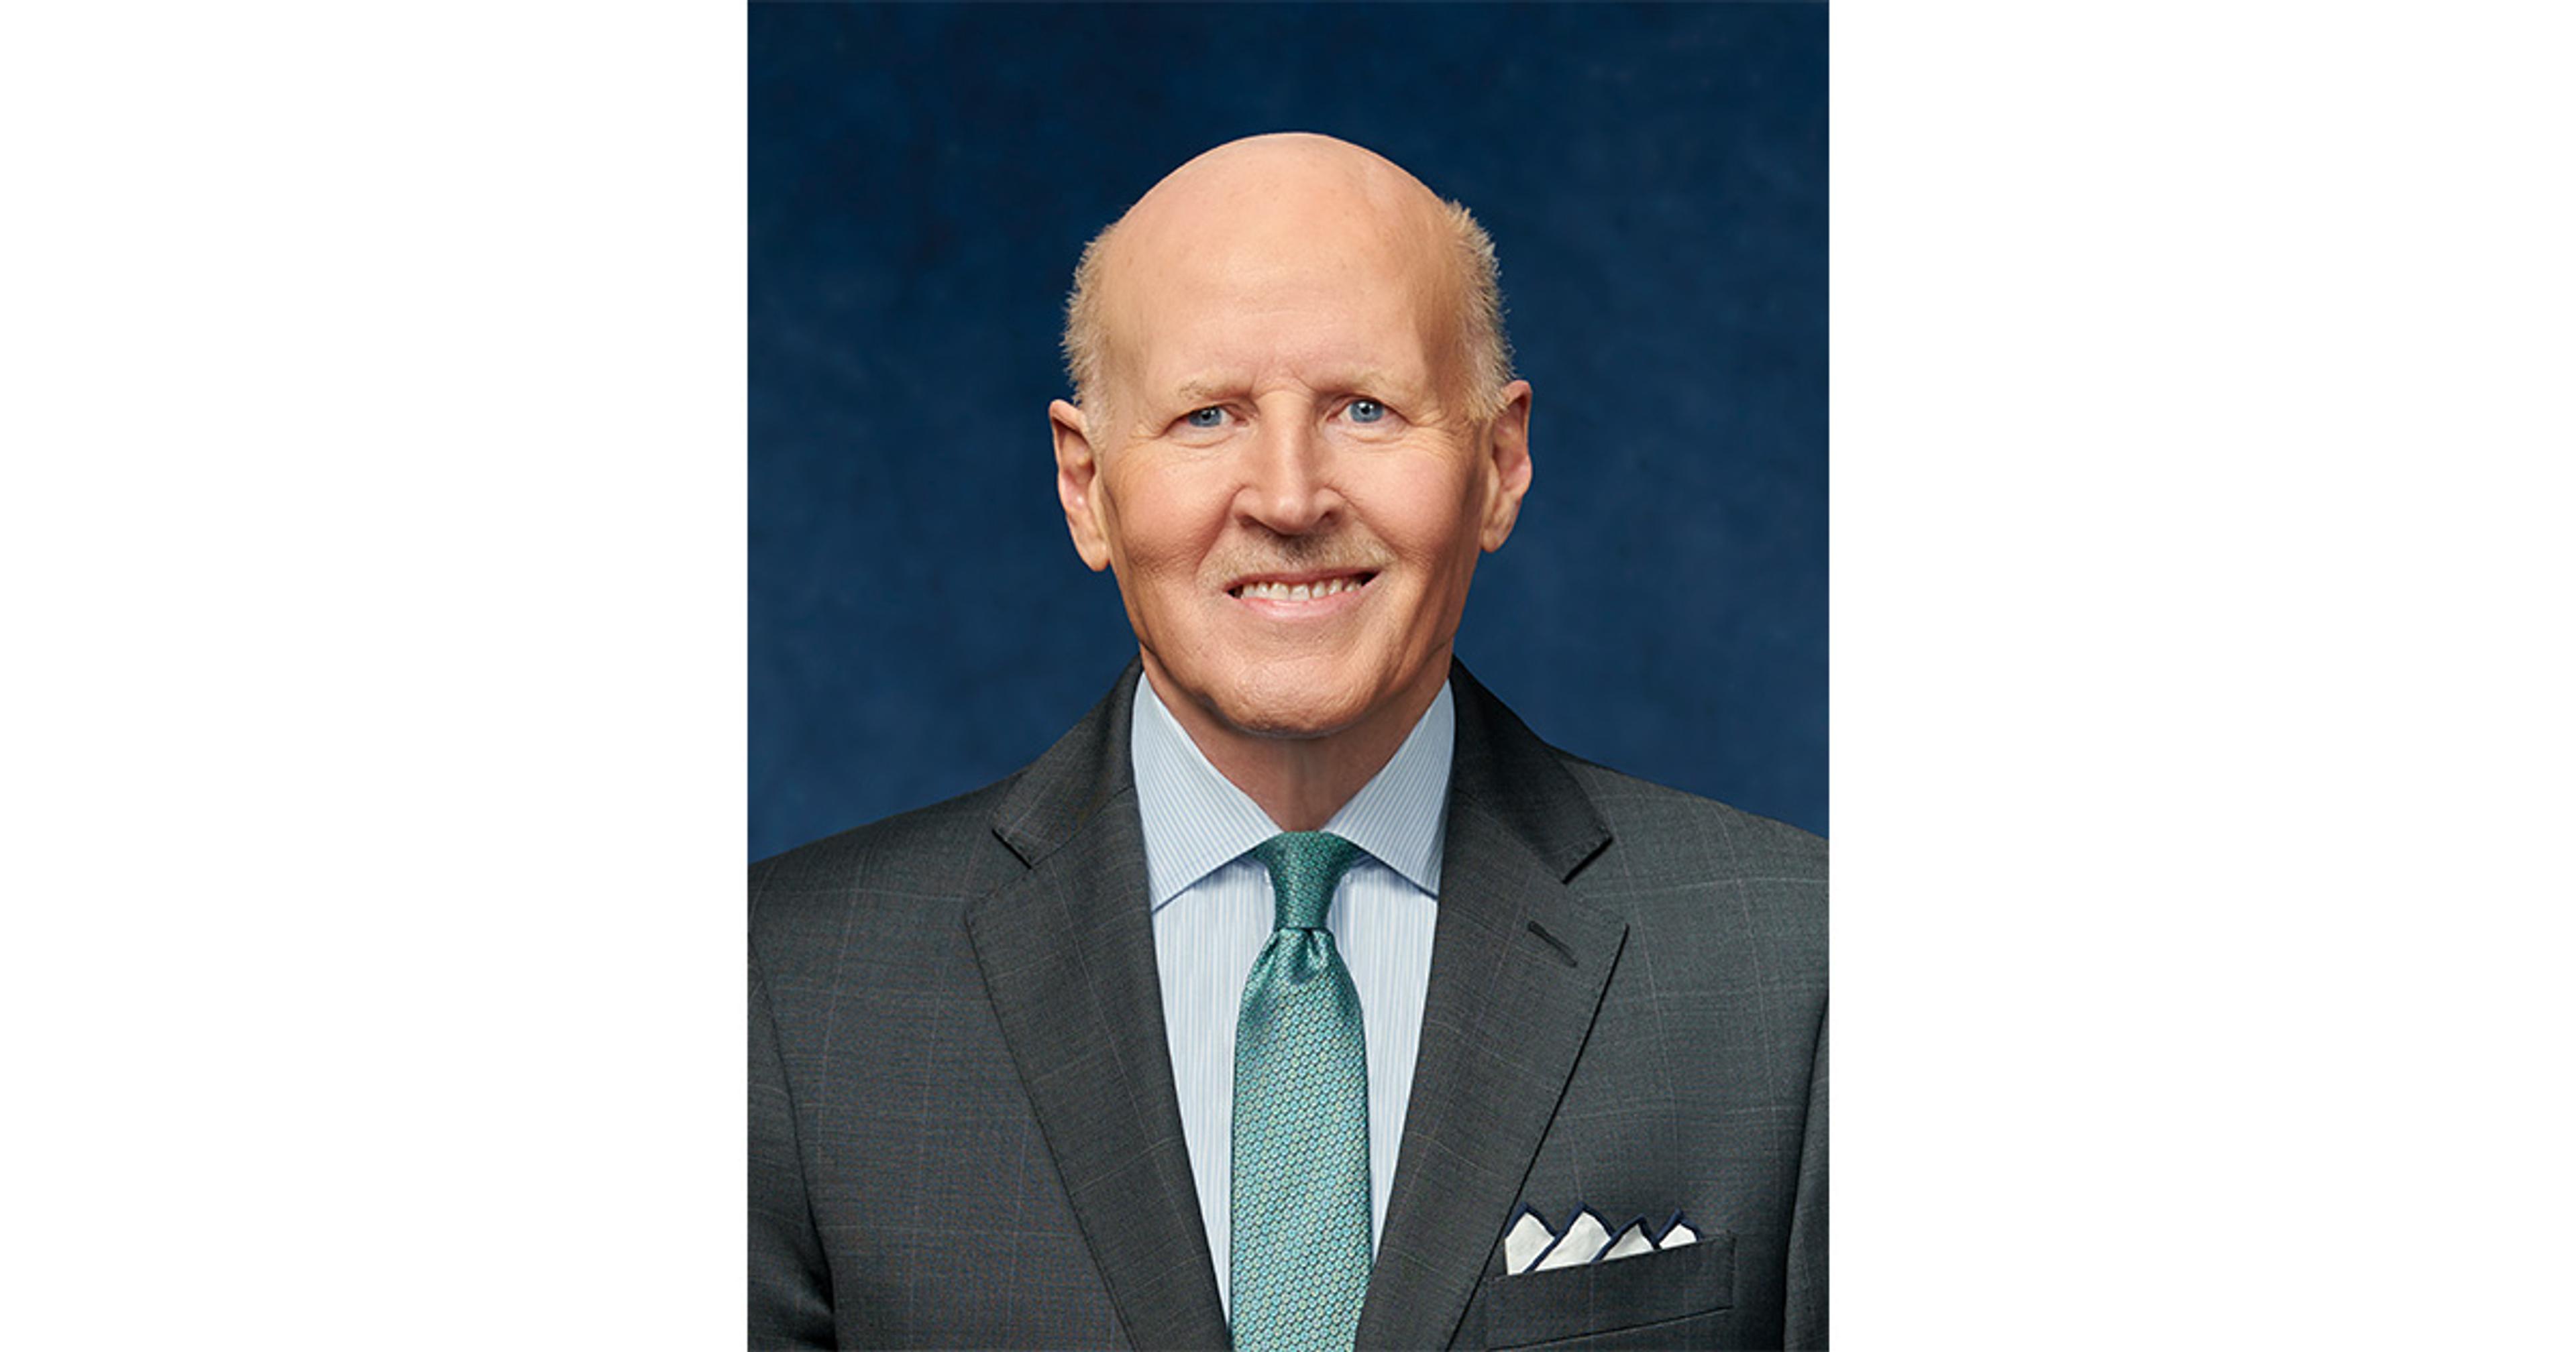 Gregory SudderthGregory A. Sudderth is chairman of the board at Blue Cross Blue Shield of Michigan.